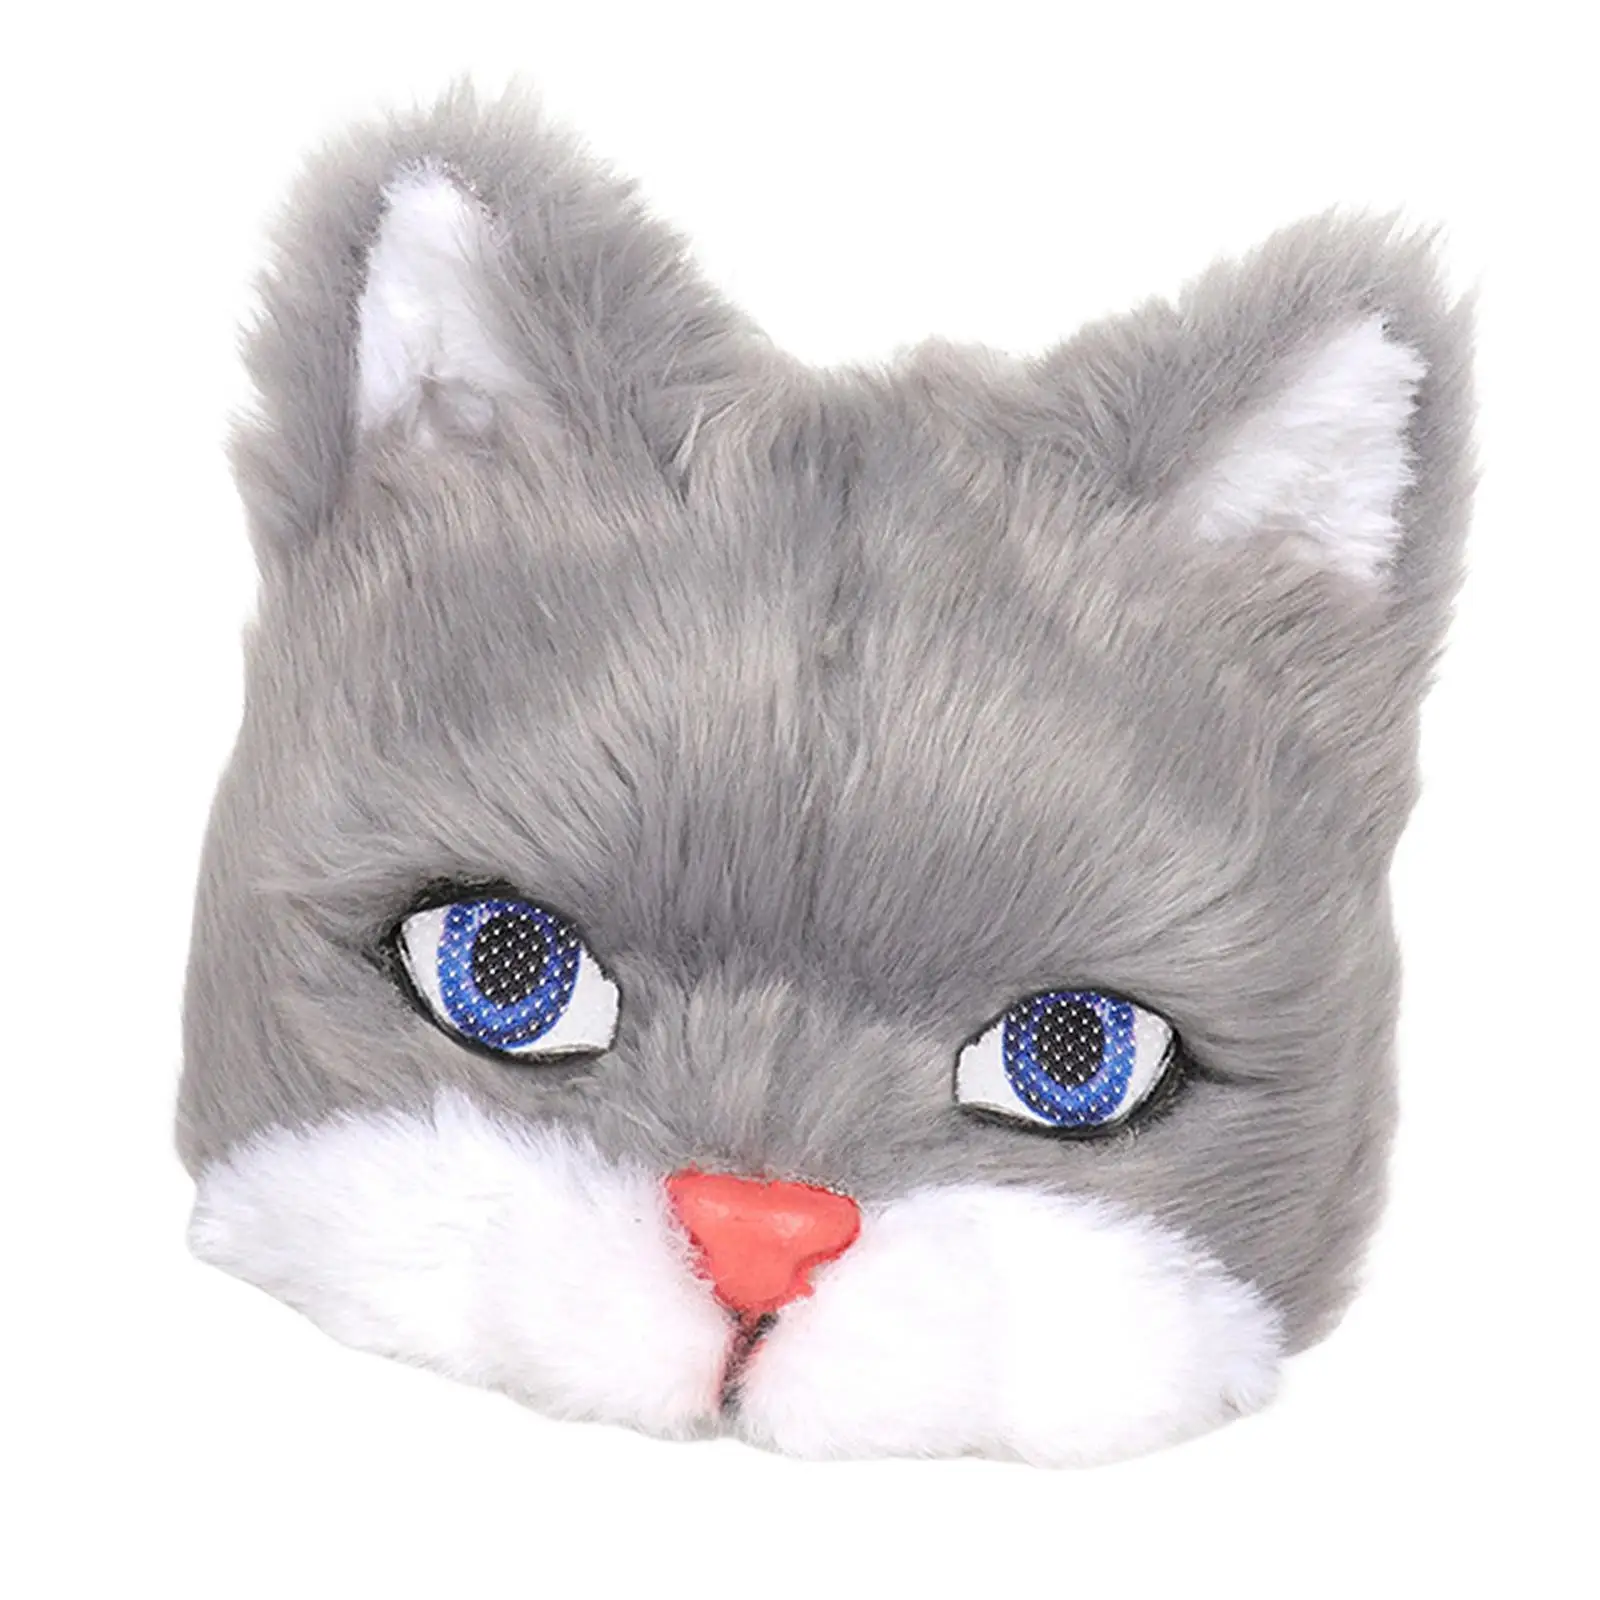 Novelty Plush Cat Mask Half Face Animal Mask Eye Mask for Kids Adults for Easter Party Carnival Photo Prop Cosplay